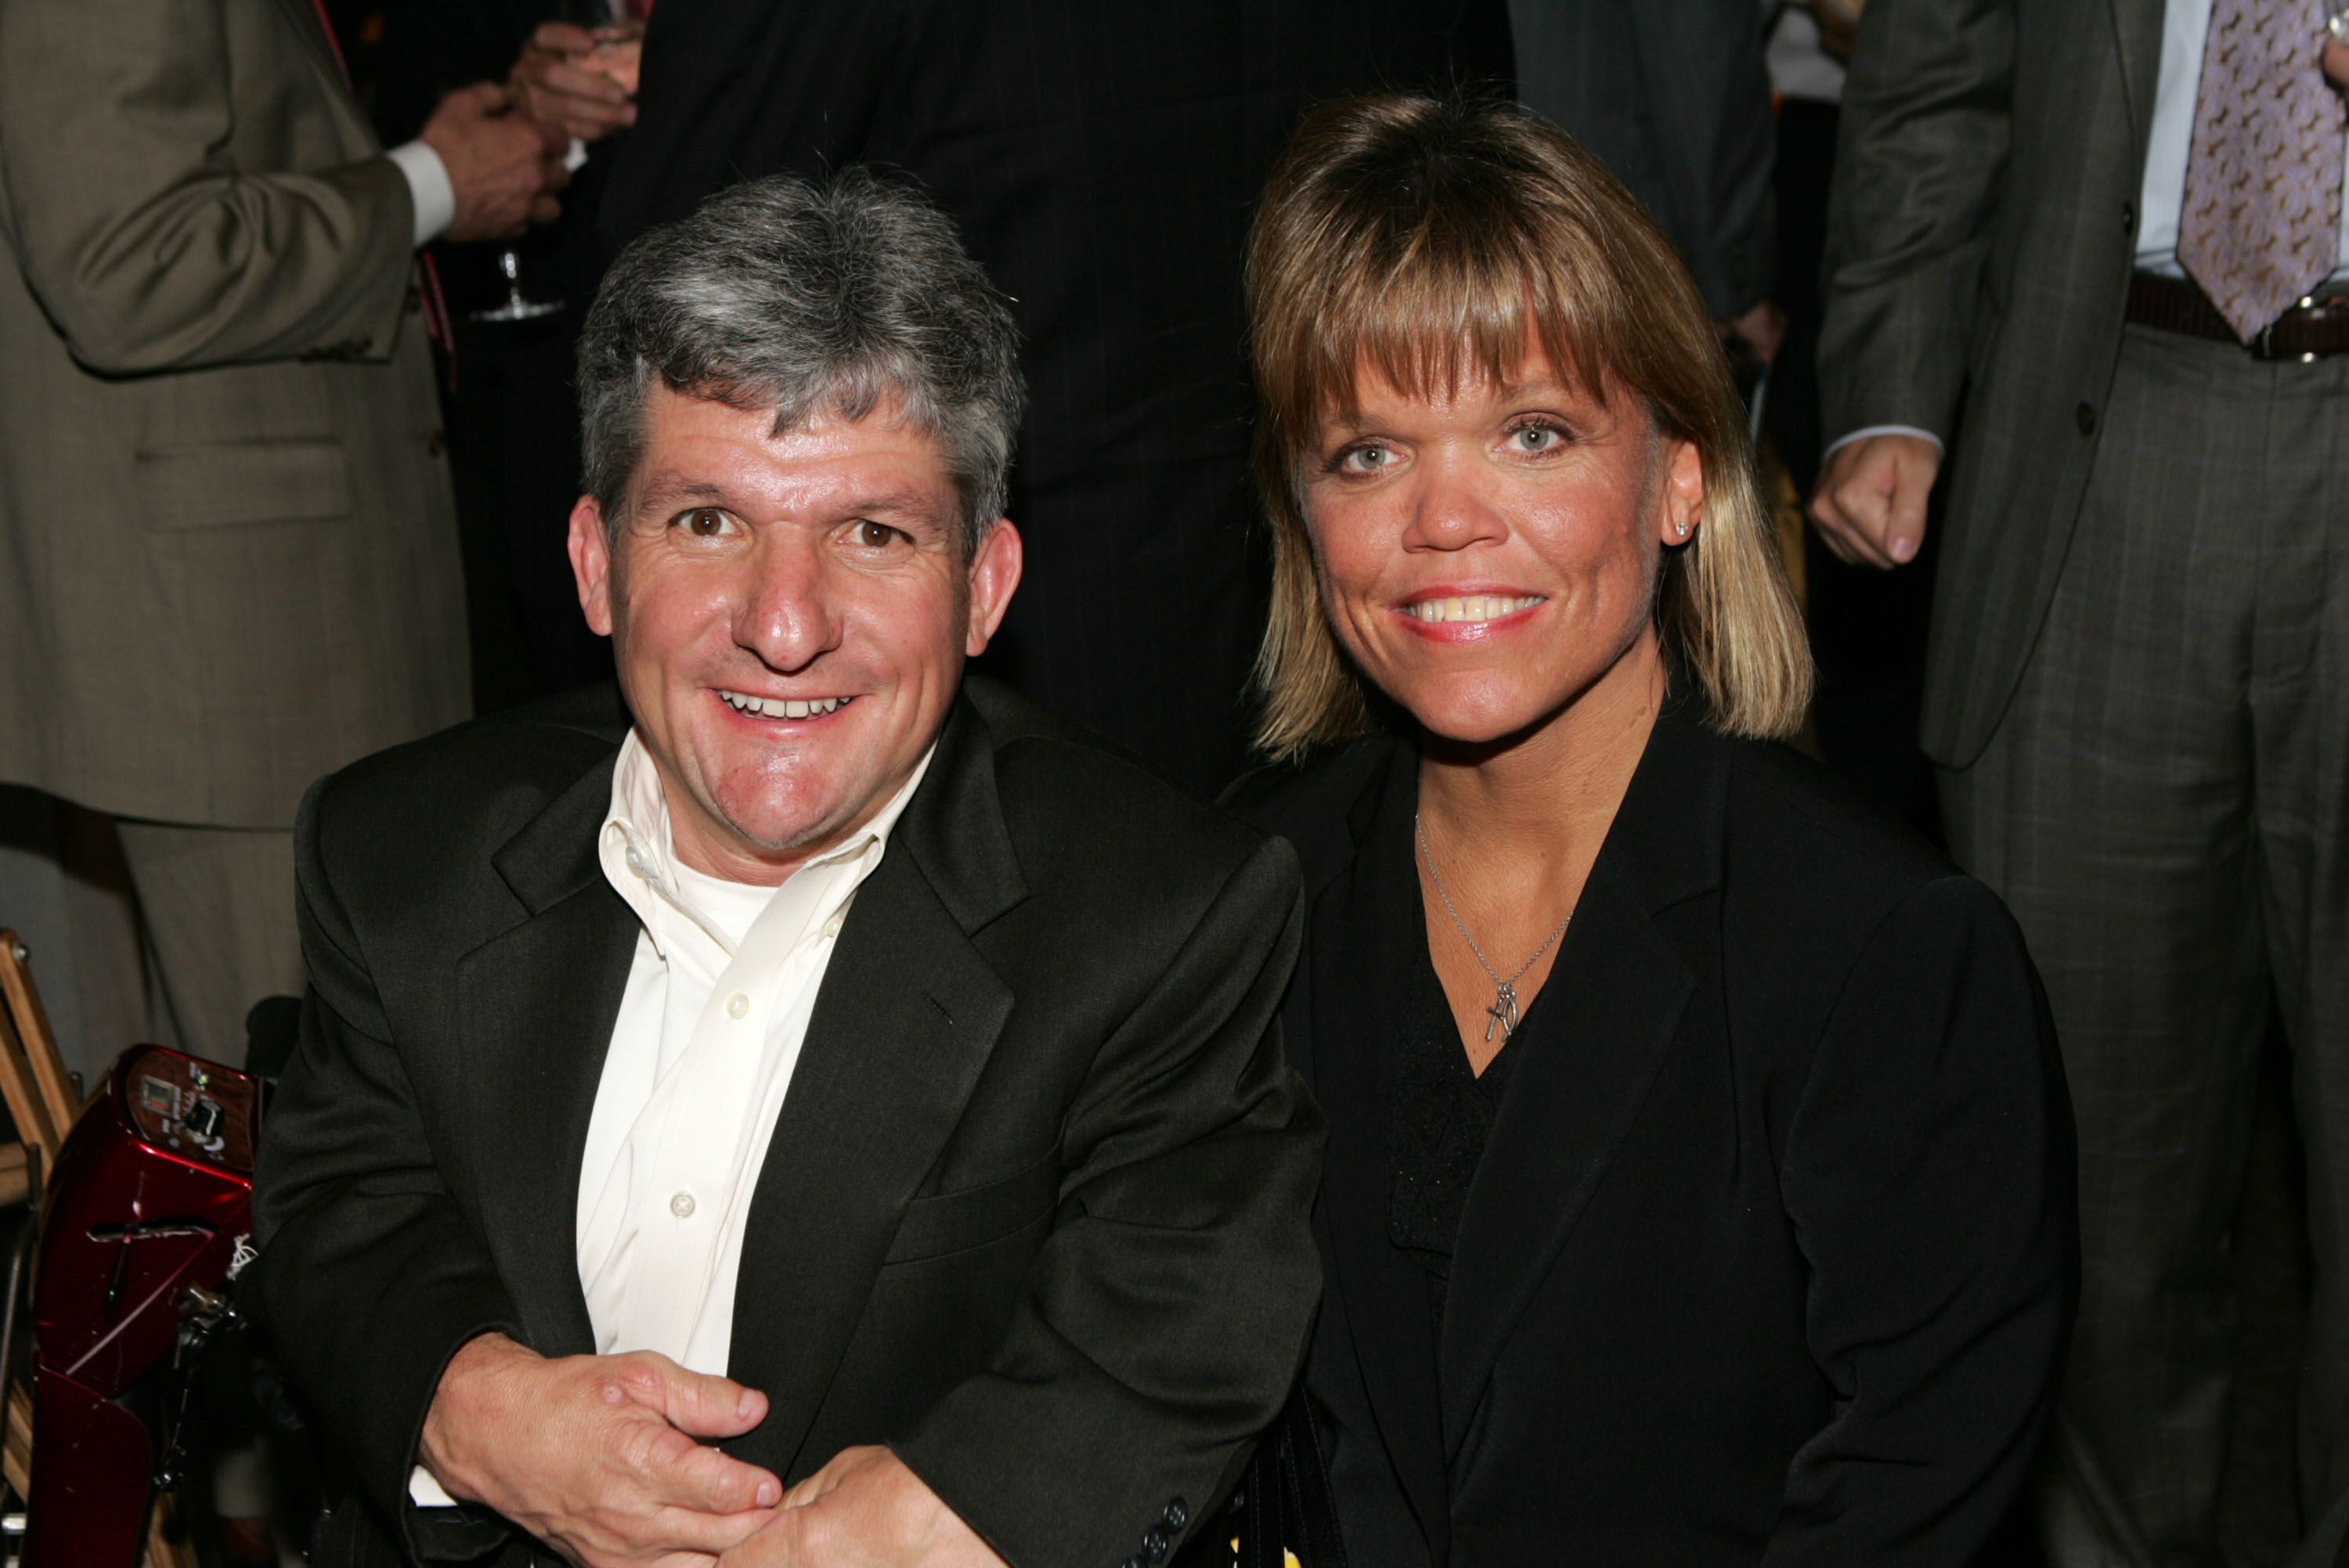 Television personalities Matt and Amy Roloff attend the Discovery Upfront Presentation NY - Talent Images at the Frederick P. Rose Hall on April 23, 2008 in New York City | Source: Getty Images